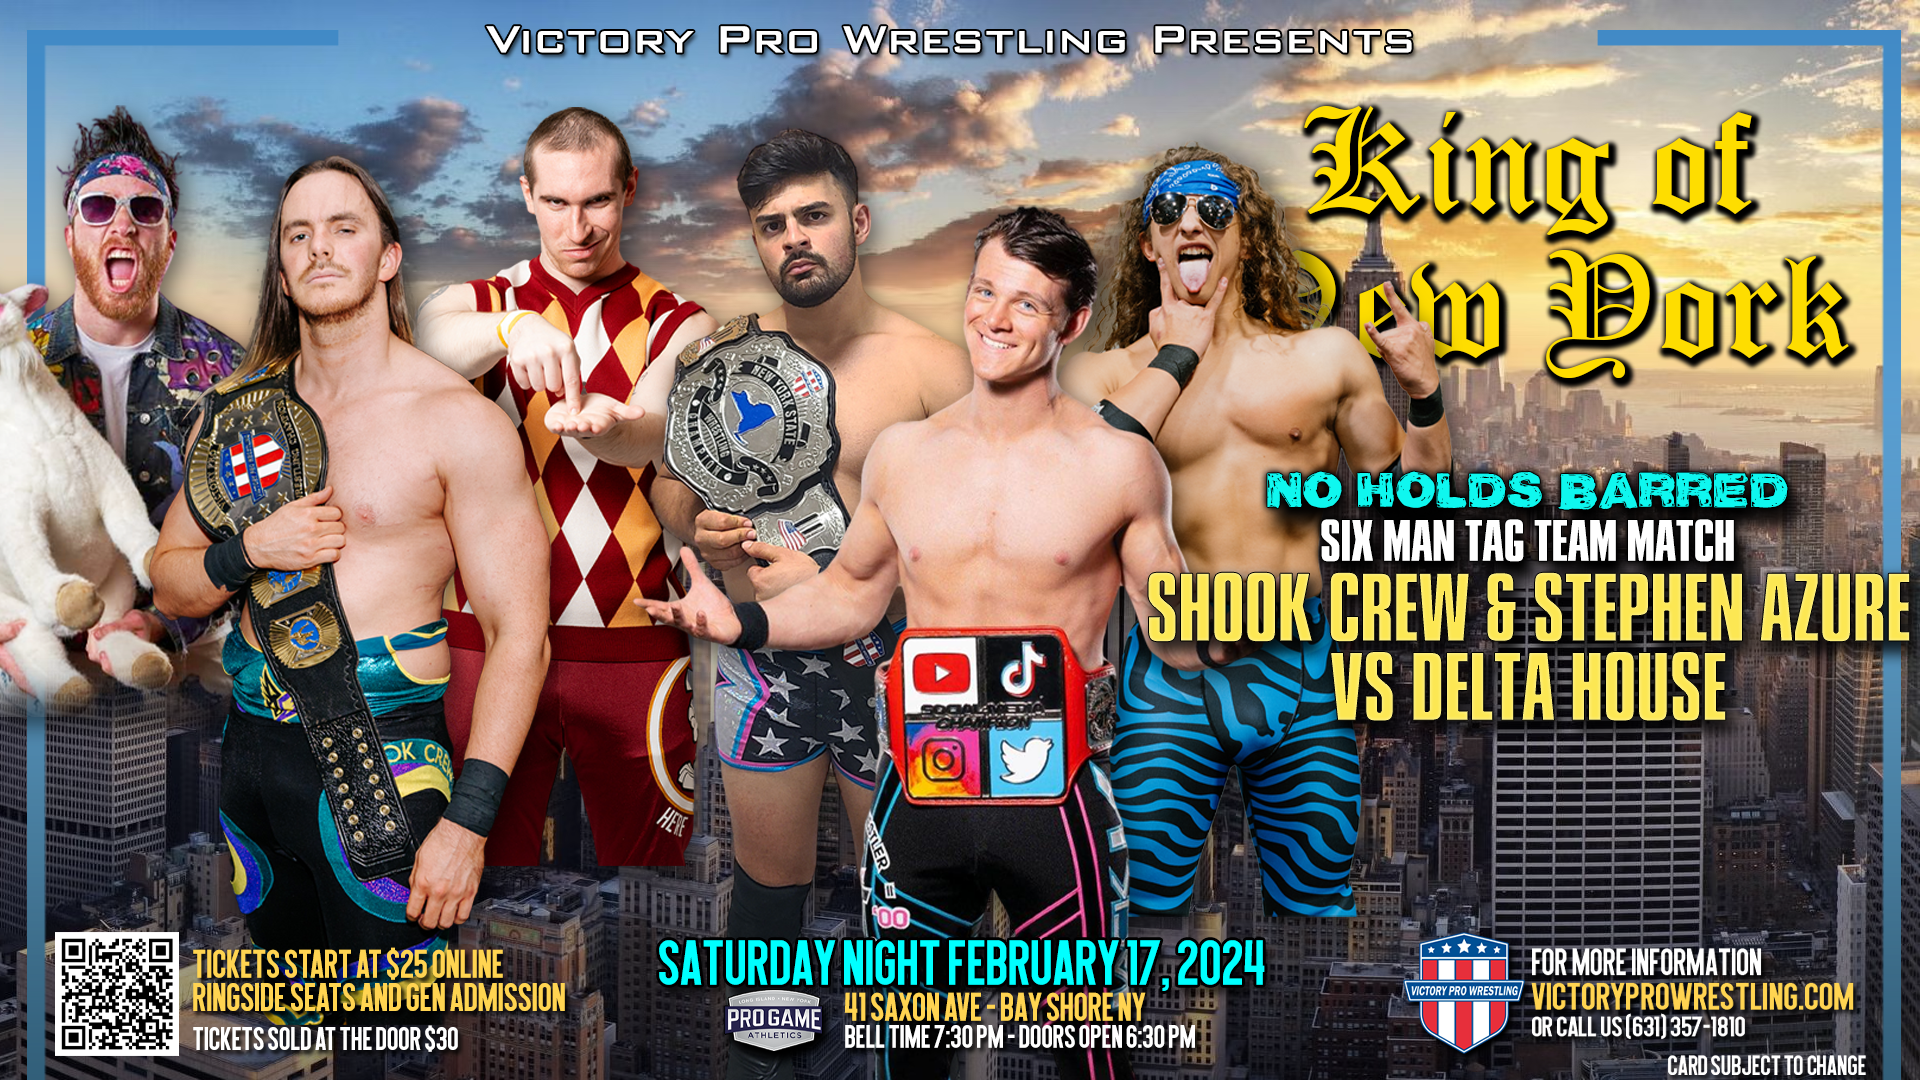 New tag team champions to be crowned at VPW 160: Blood Sweat & 17 Years  April 15 – Victory Pro Wrestling